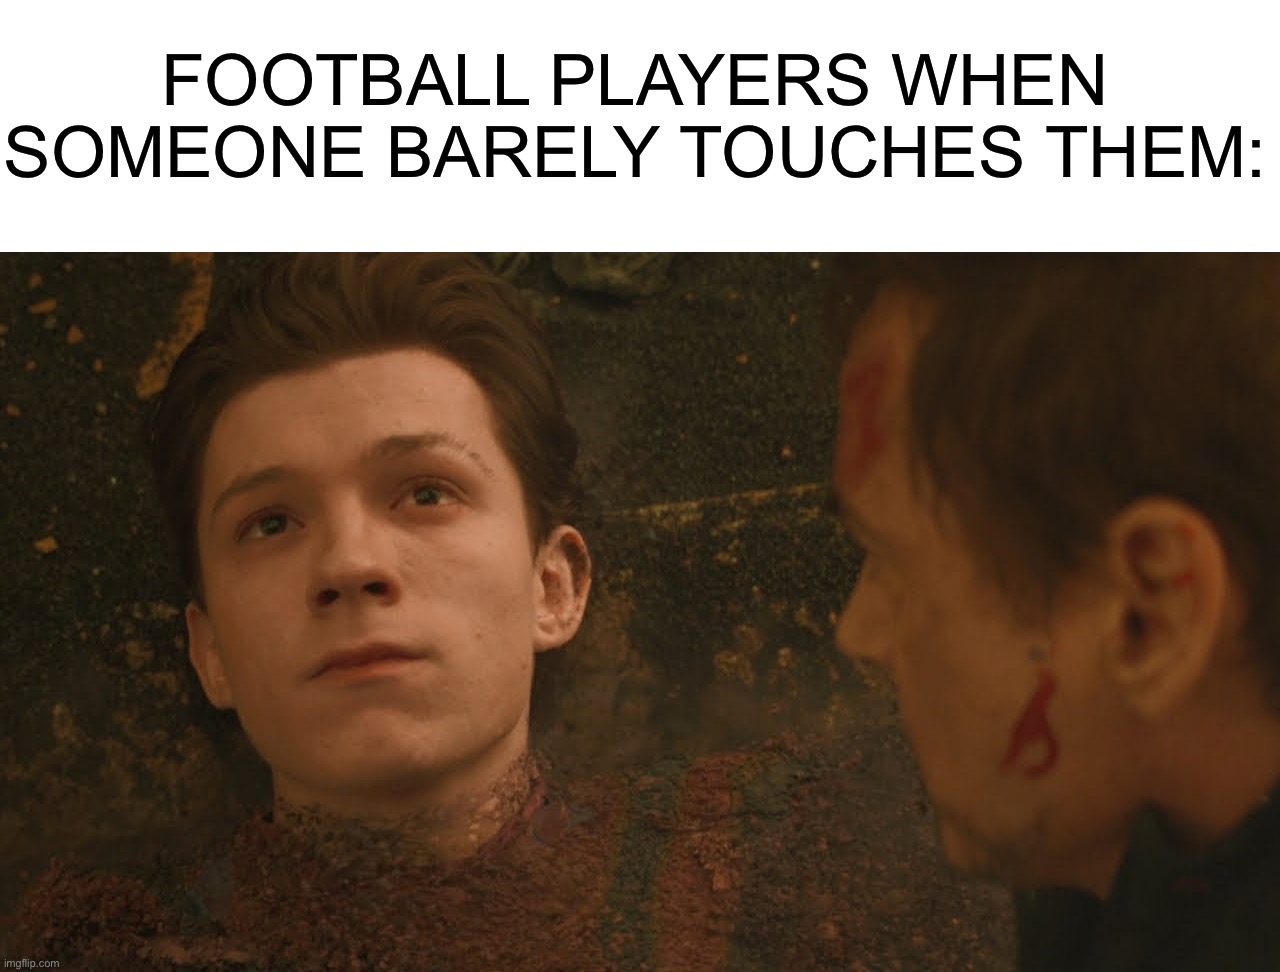 True ngl |  FOOTBALL PLAYERS WHEN SOMEONE BARELY TOUCHES THEM: | image tagged in mr stark i don't feel so good,memes,funny,football,oop,dies | made w/ Imgflip meme maker